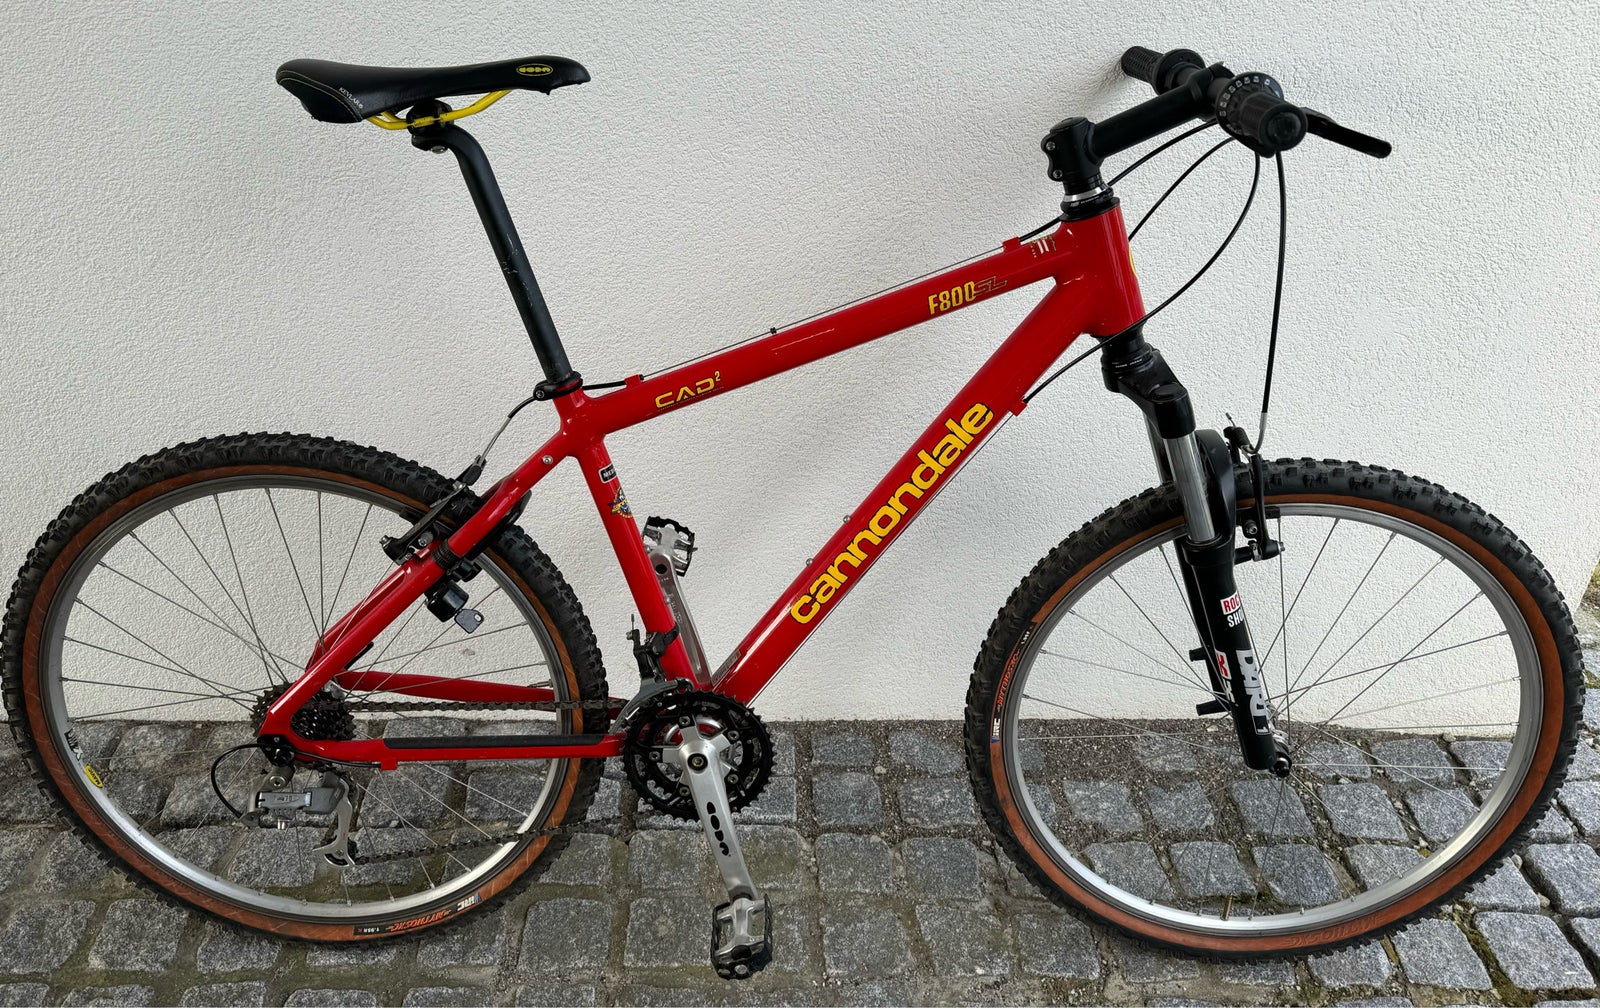 Cannondale F800 SL, anden mountainbike, 17-18 tommer